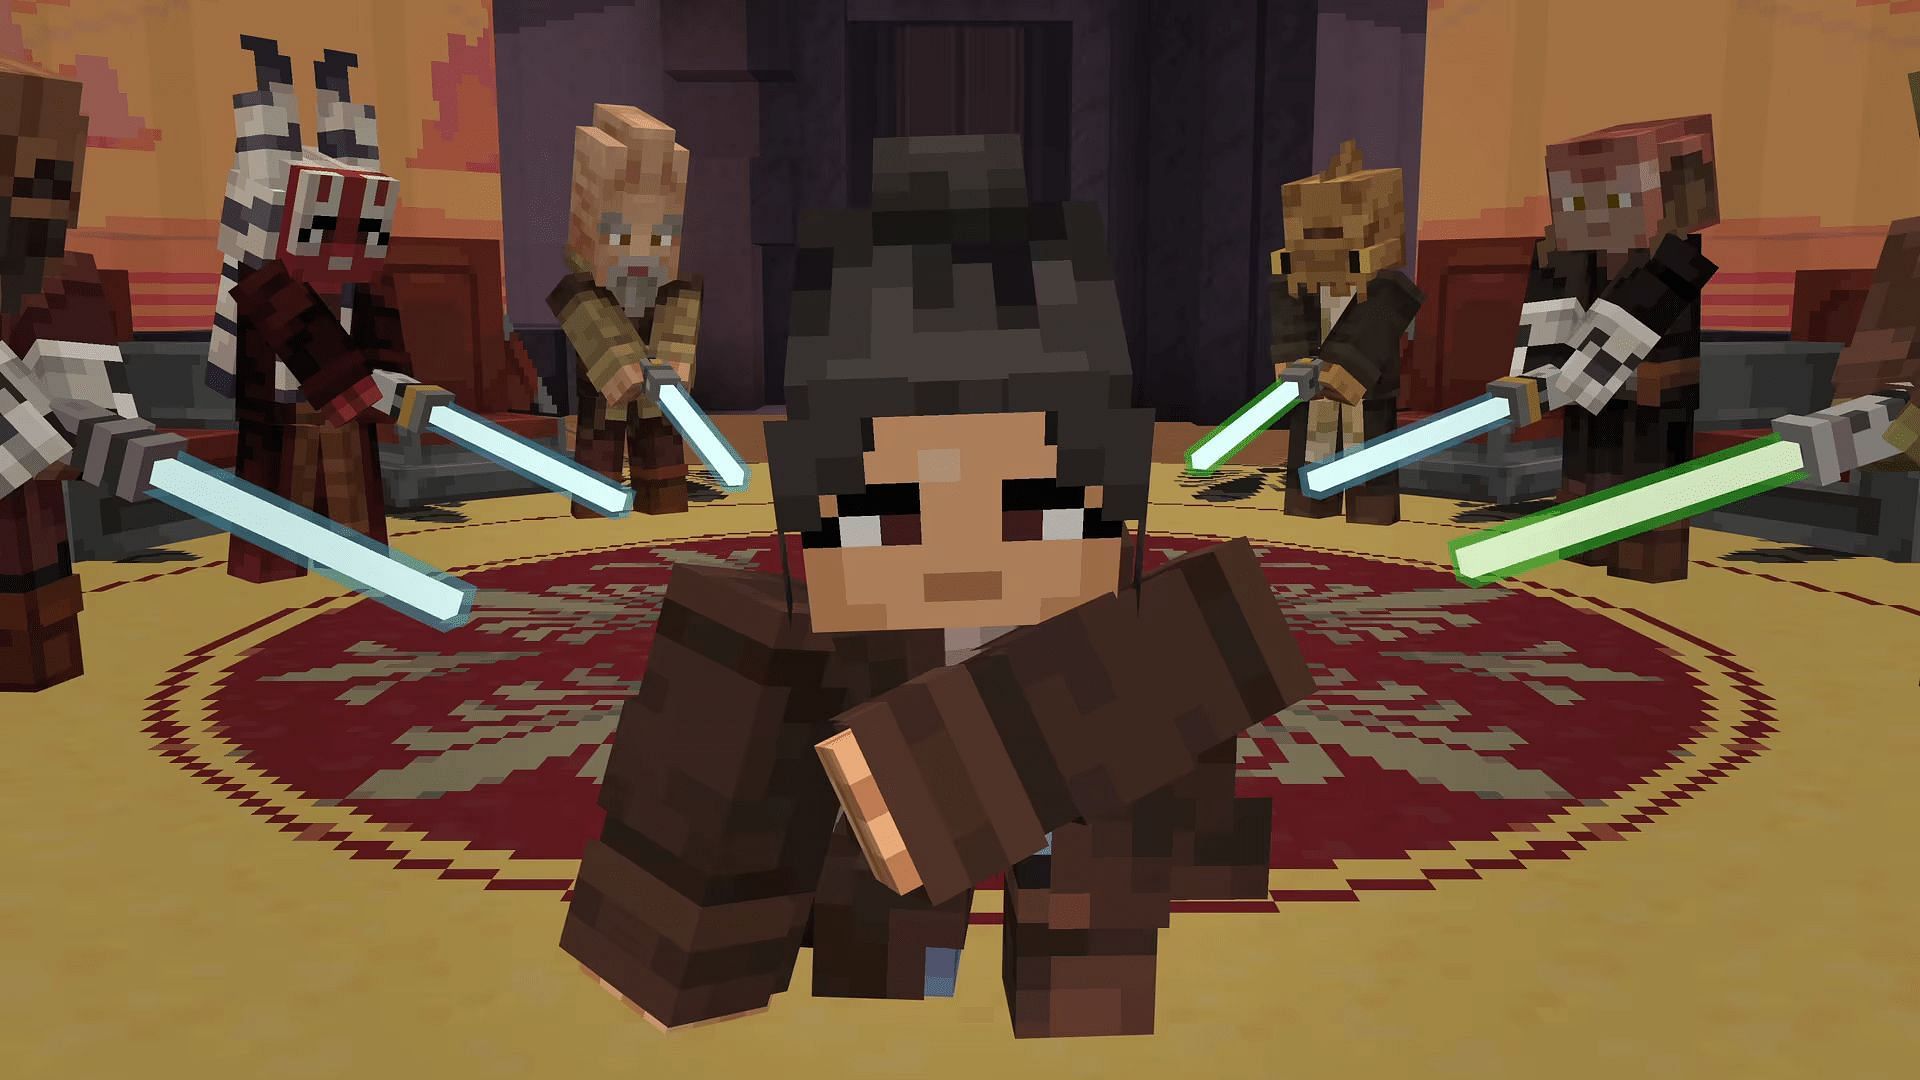 Shirt Skin for roblox based on Star Wars Universe in 2023